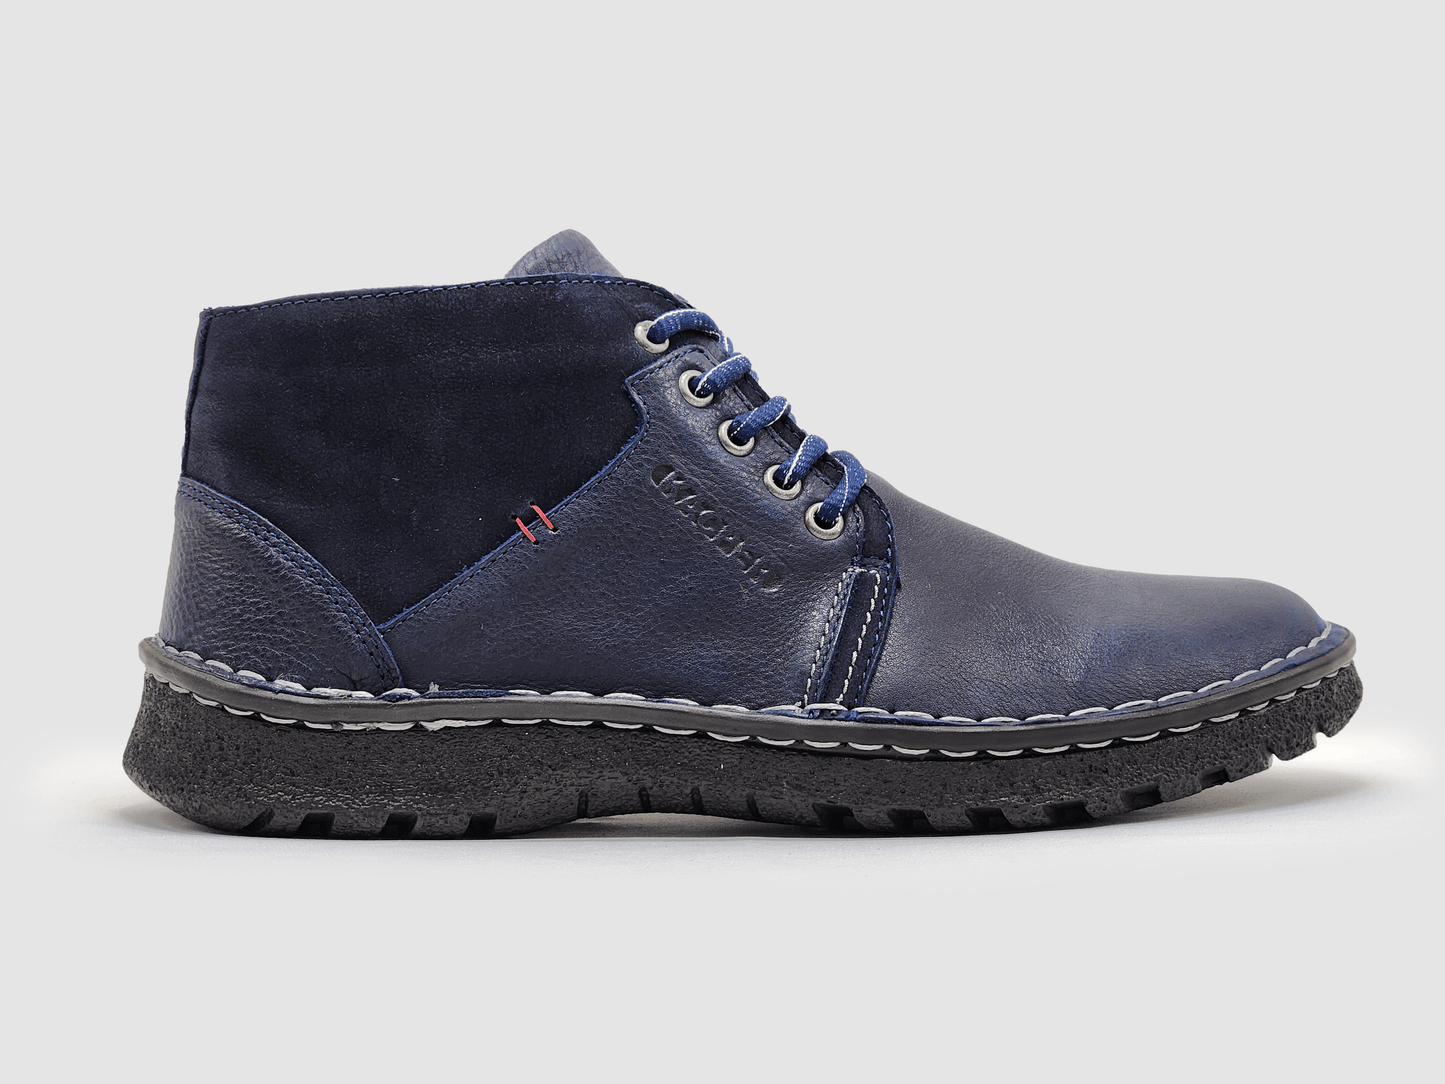 Men's Frosty Insulated Zip-Up Leather Boots - Navy - Kacper Global Shoes 